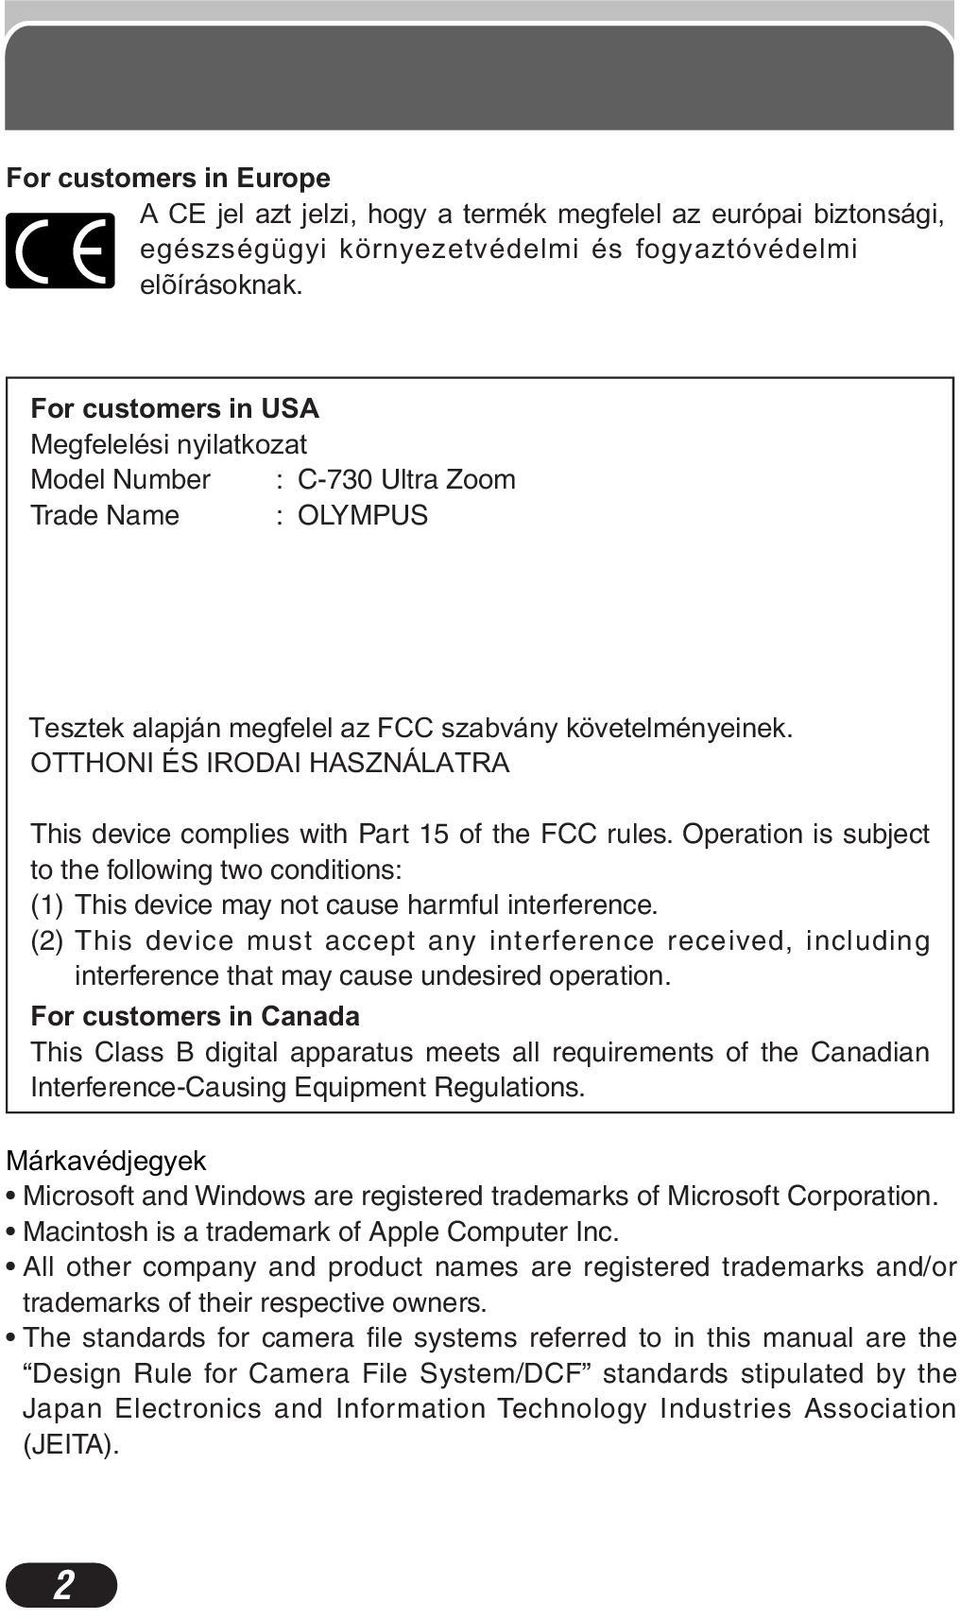 OTTHONI ÉS IRODAI HASZNÁLATRA This device complies with Part 15 of the FCC rules. Operation is subject to the following two conditions: (1) This device may not cause harmful interference.